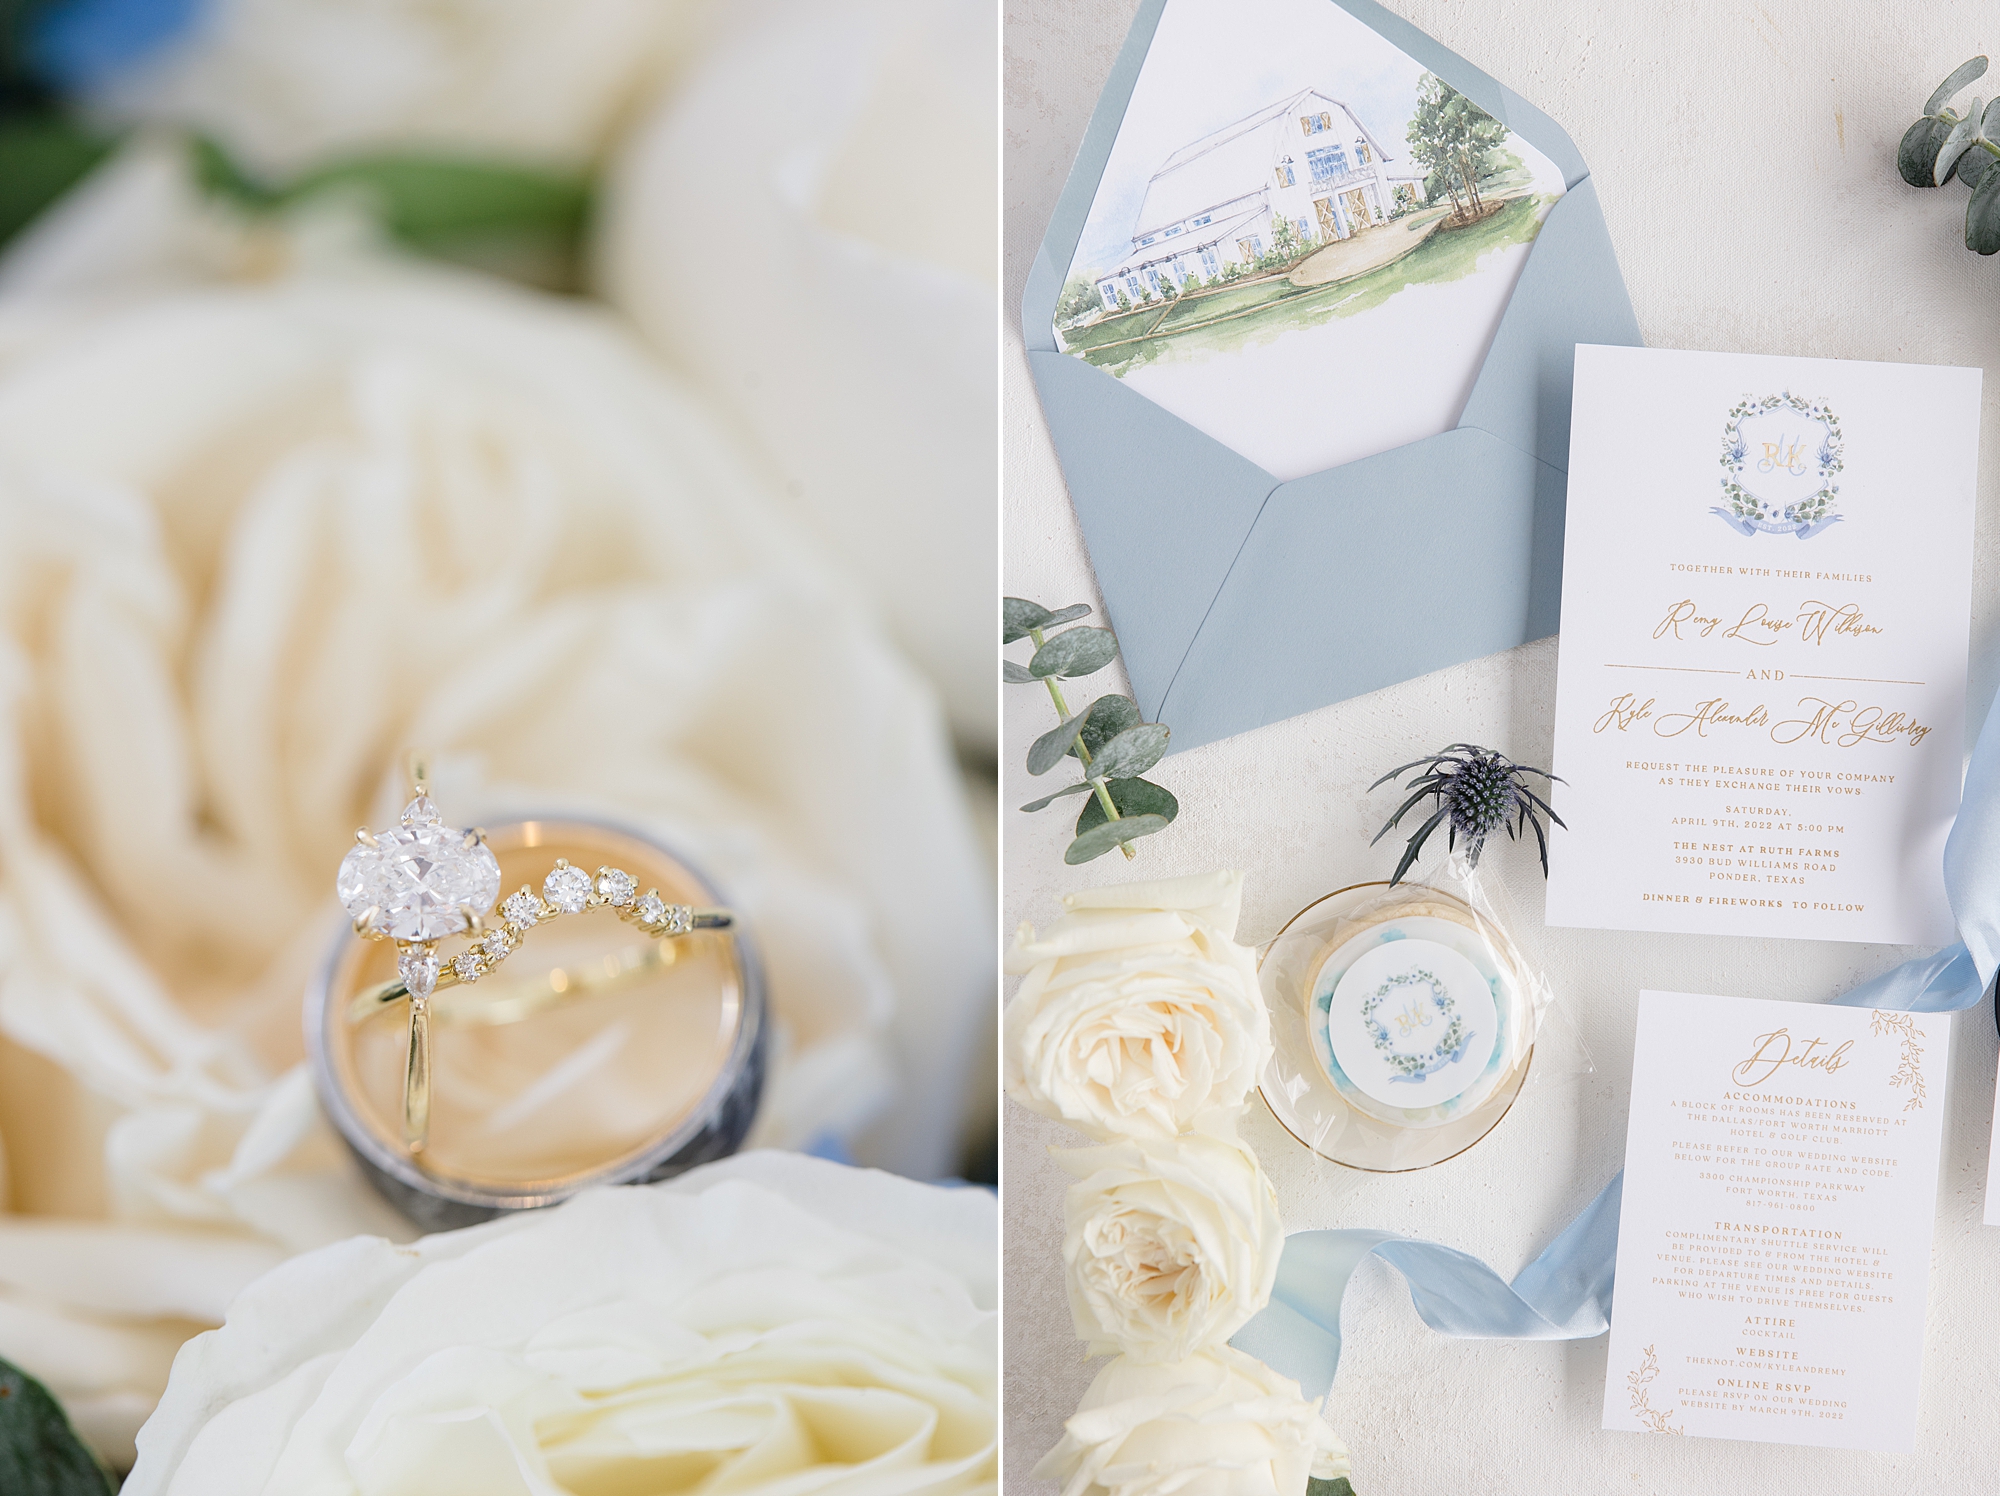 bride's jewelry and invitation suite in blue envelope 